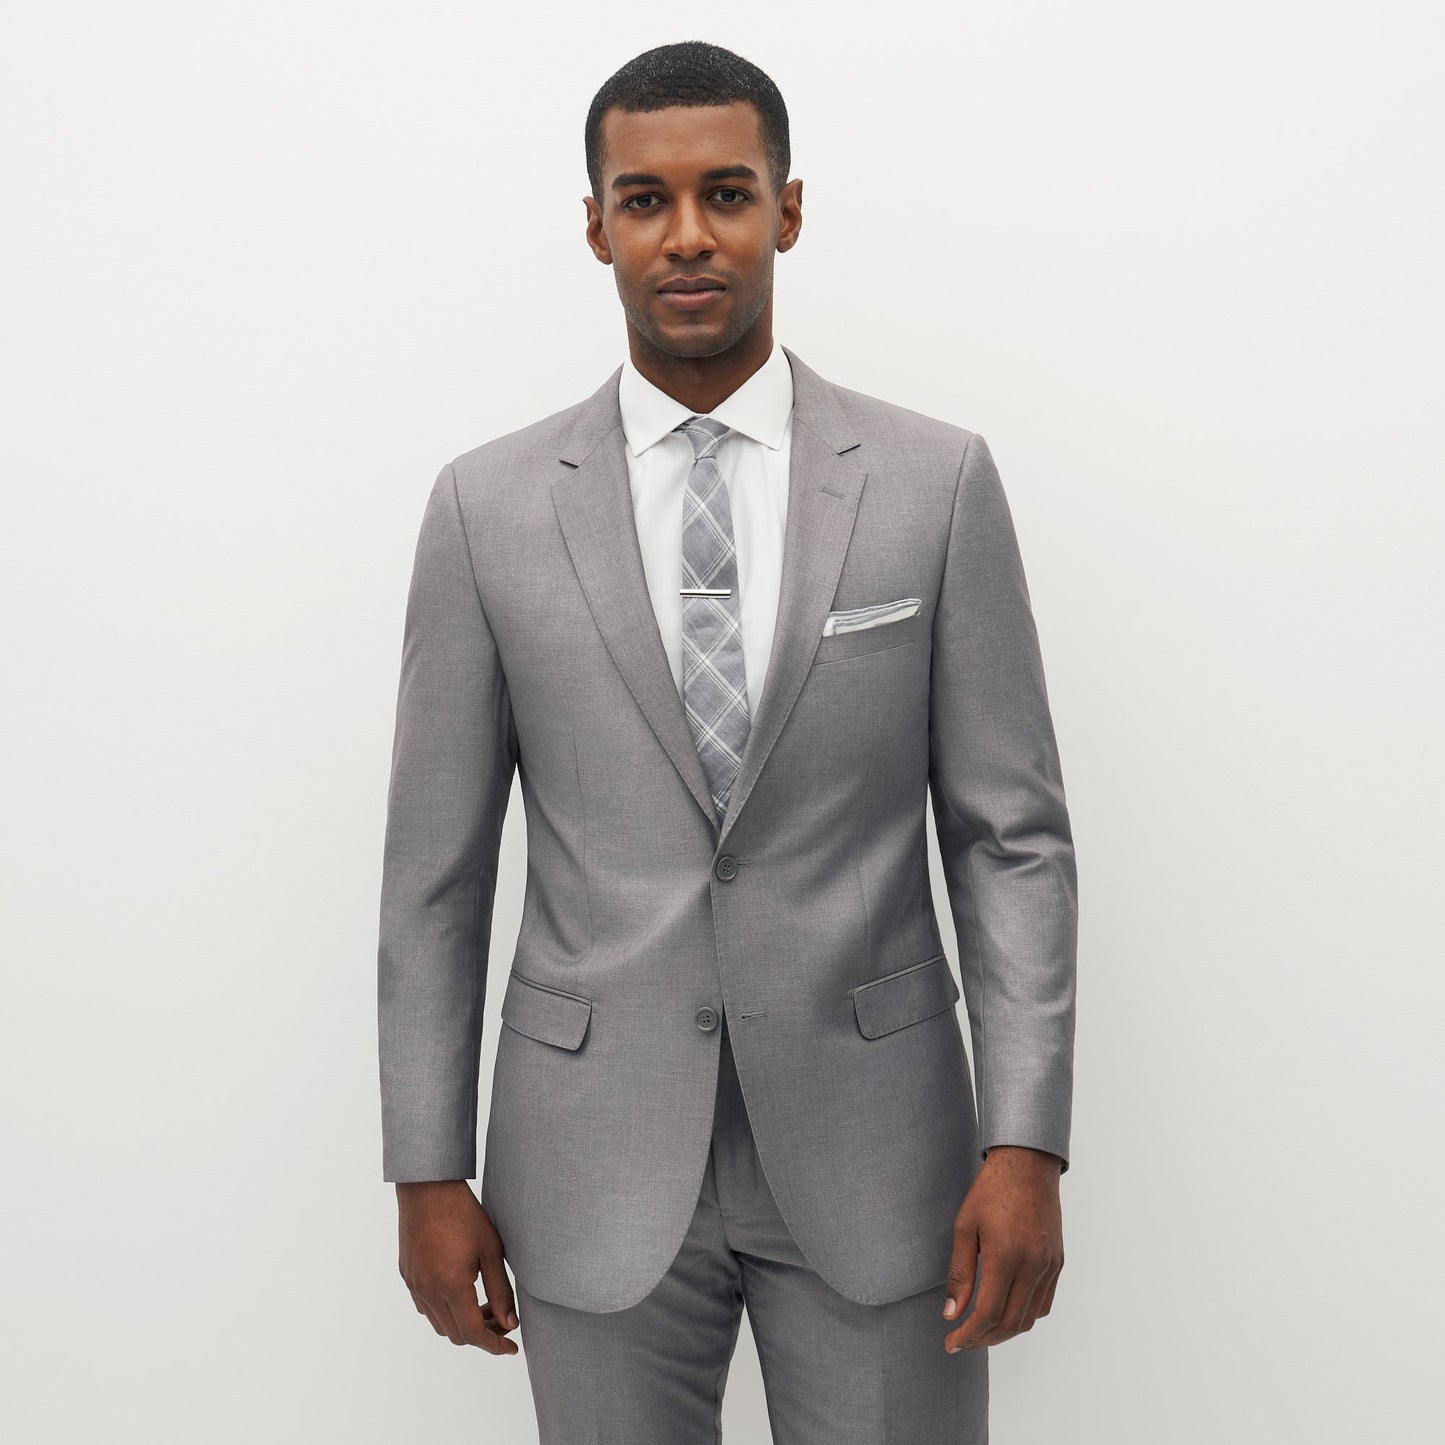 Textured Gray Suit Jacket by SuitShop